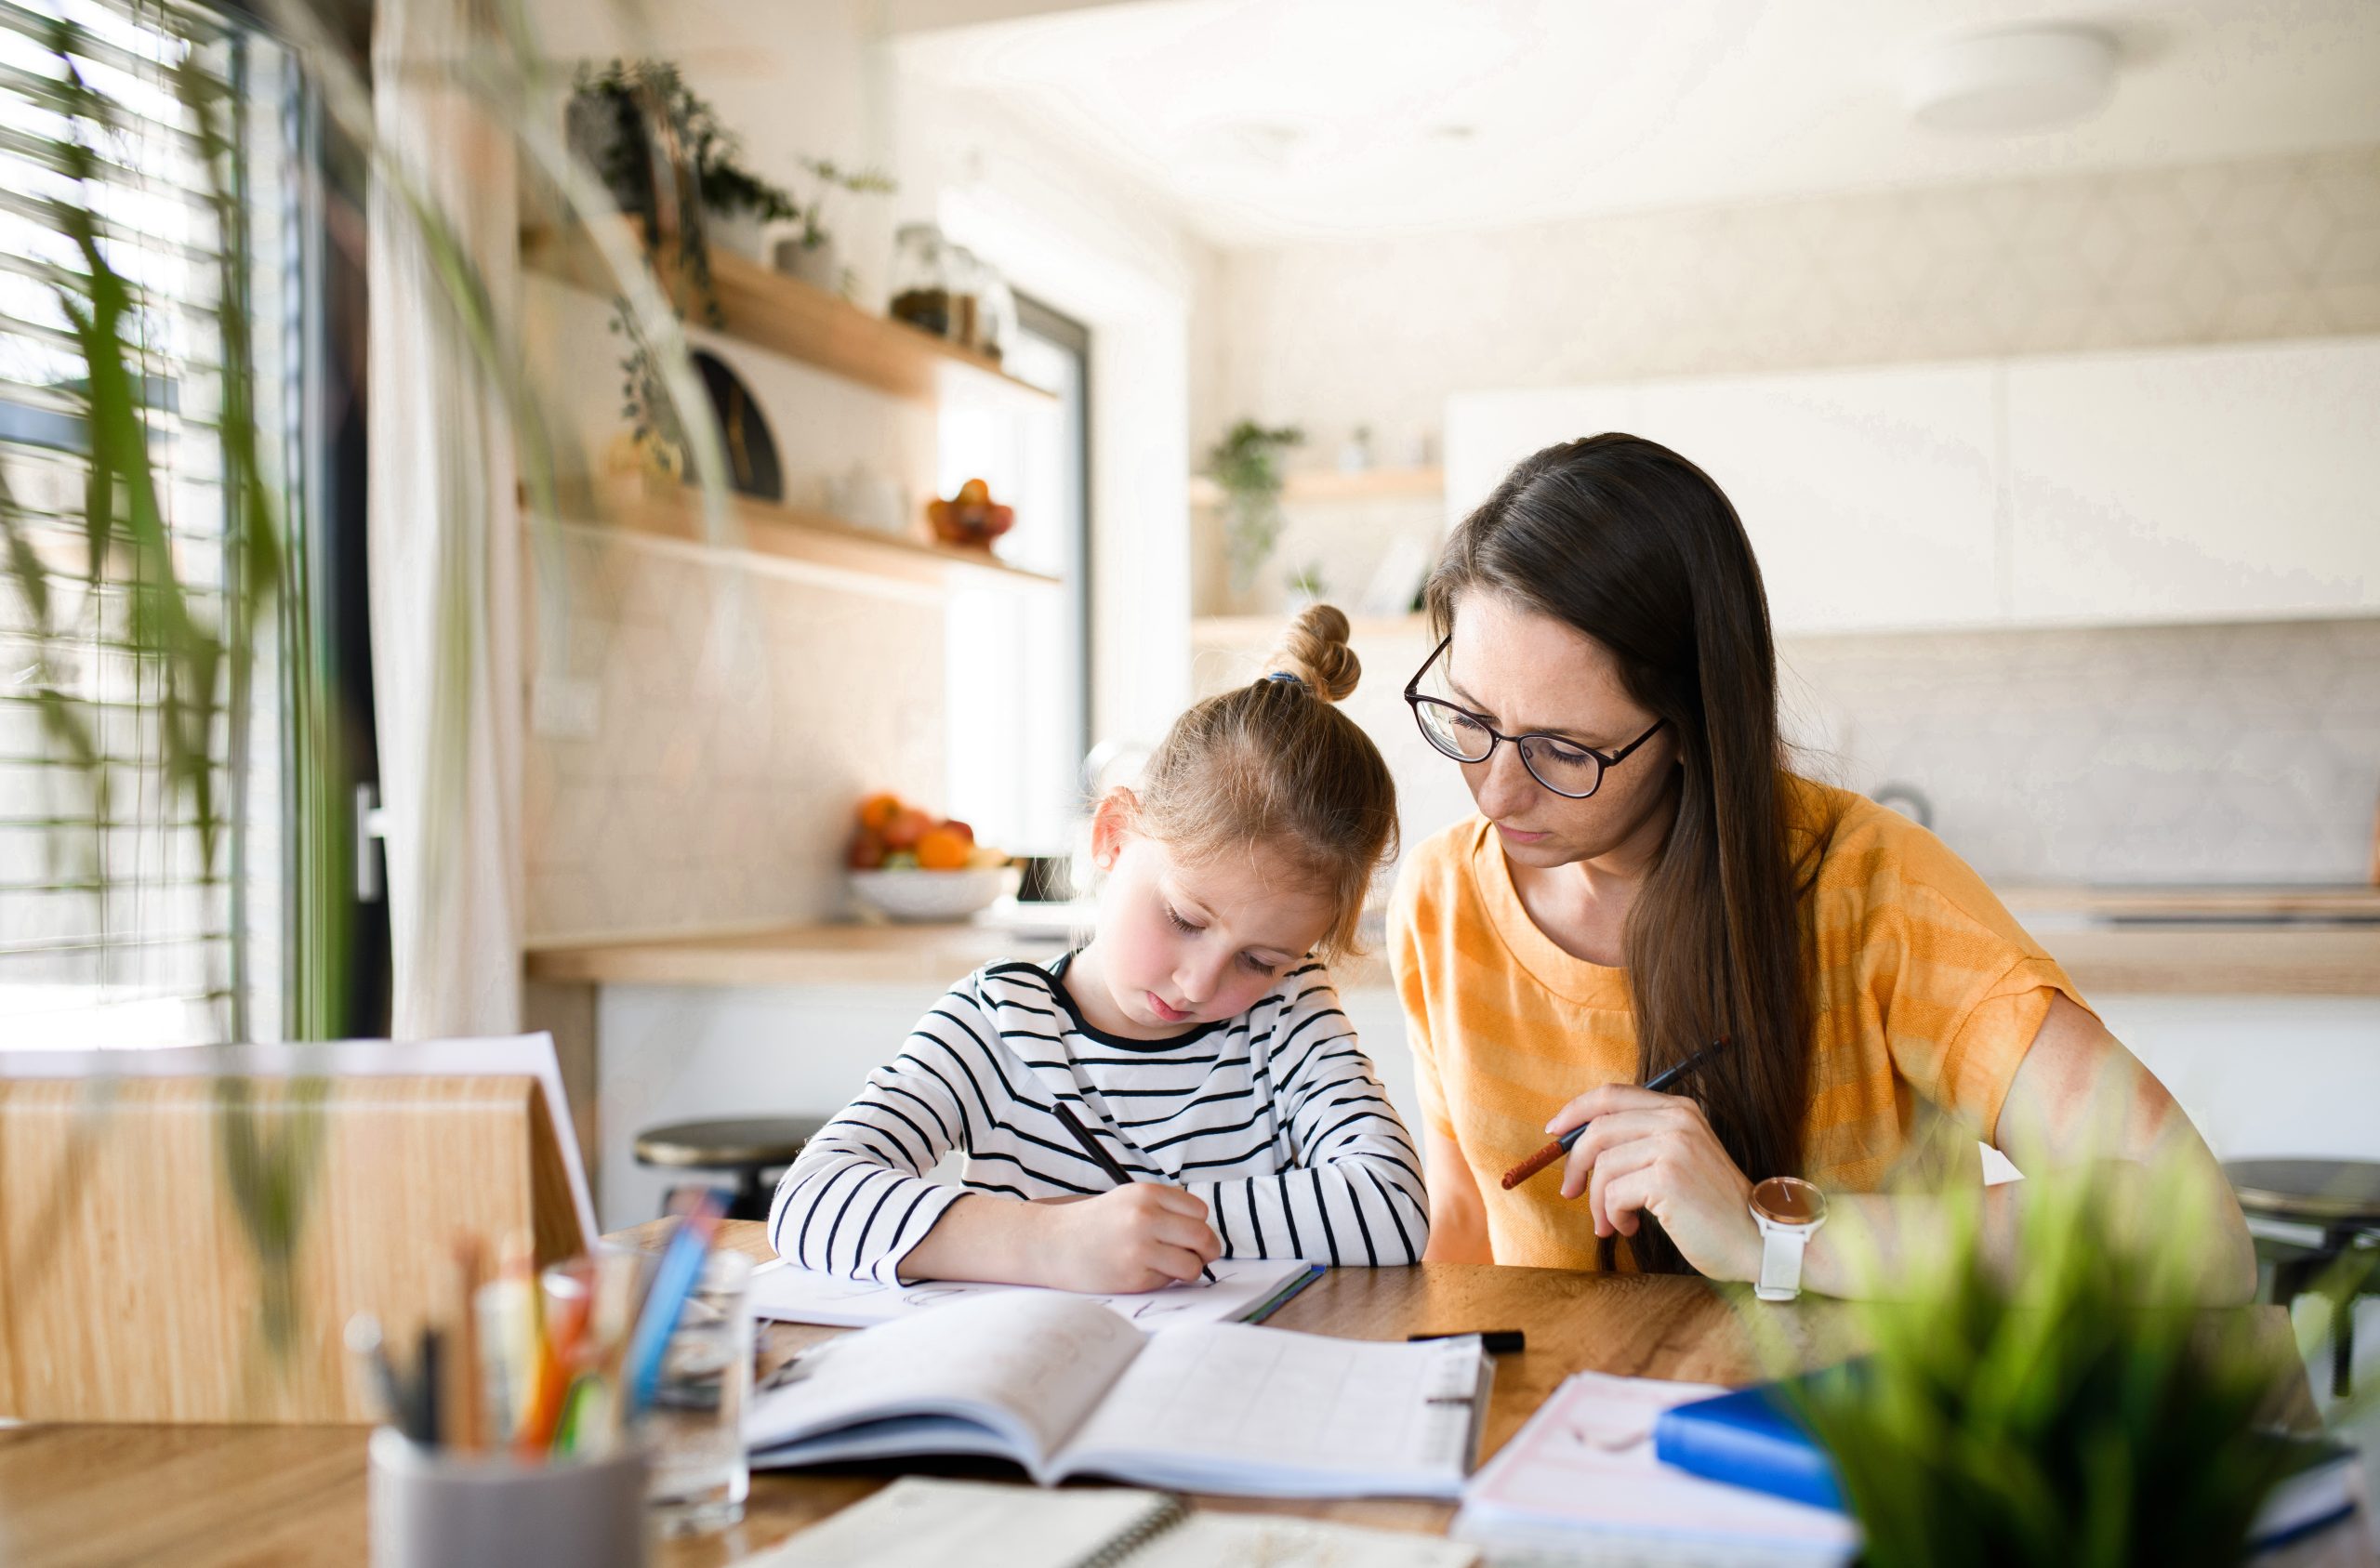 Parent and child doding educatioonal work in a home setting